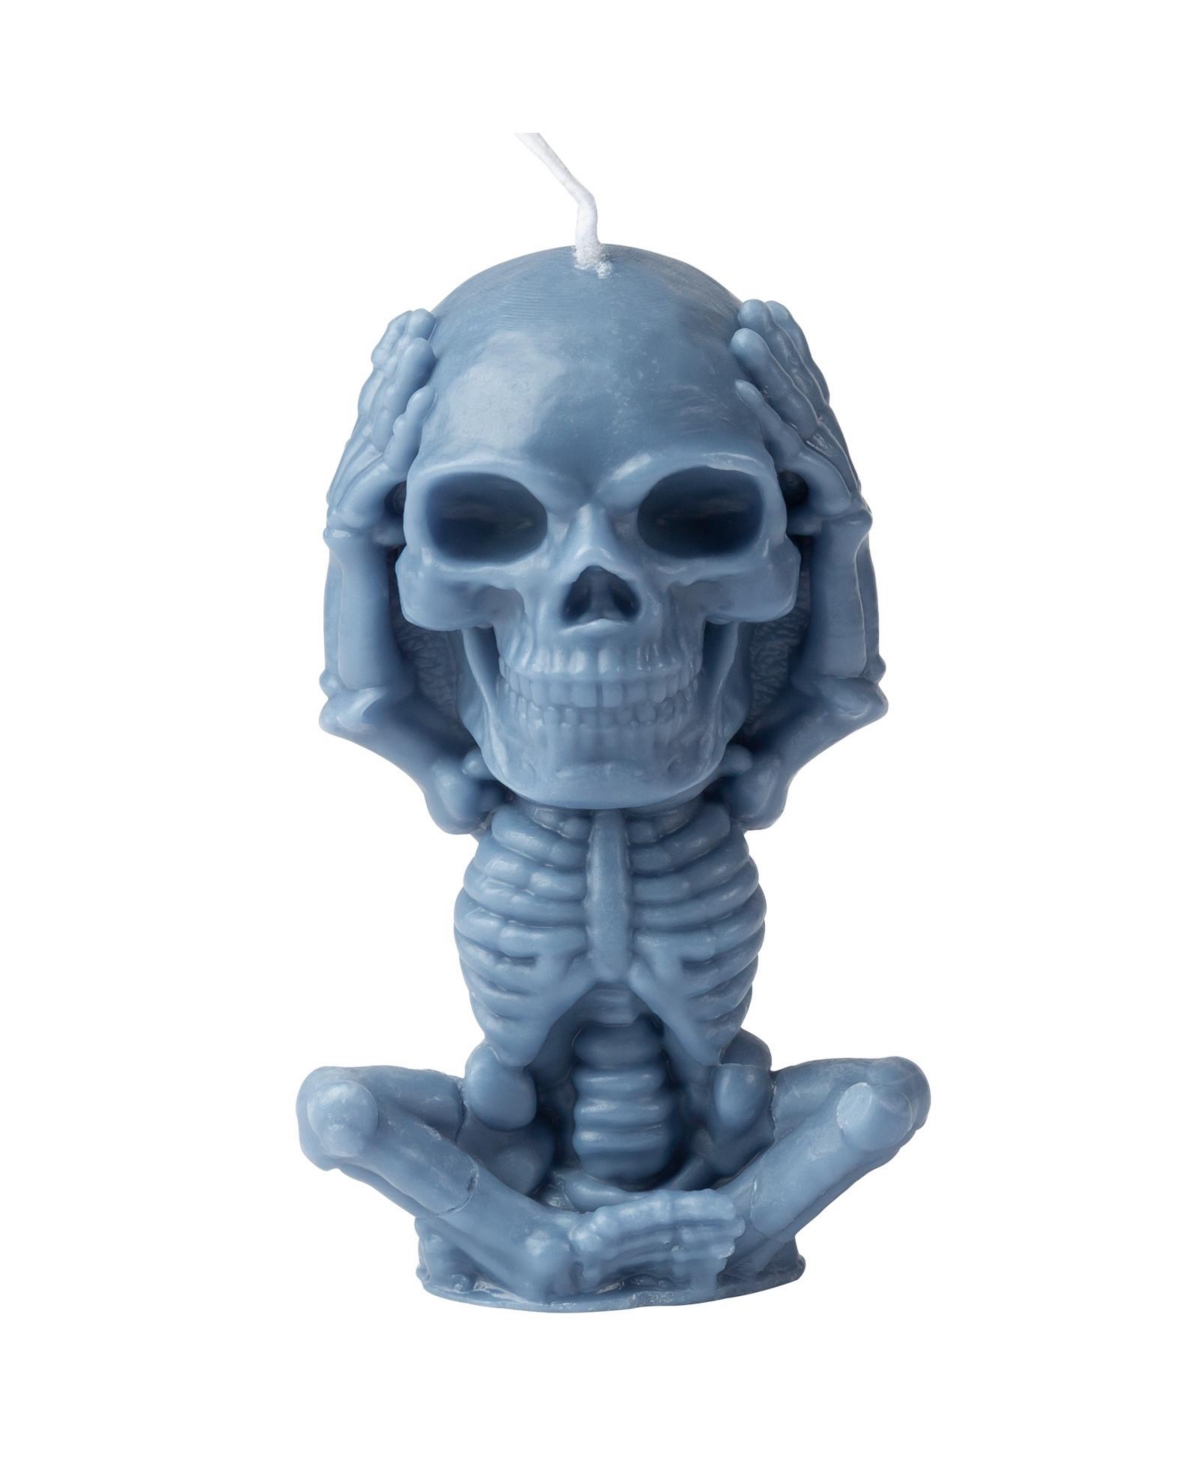 Skull Holding Head Creative Candle for Spooky Halloween Decoration - Blue